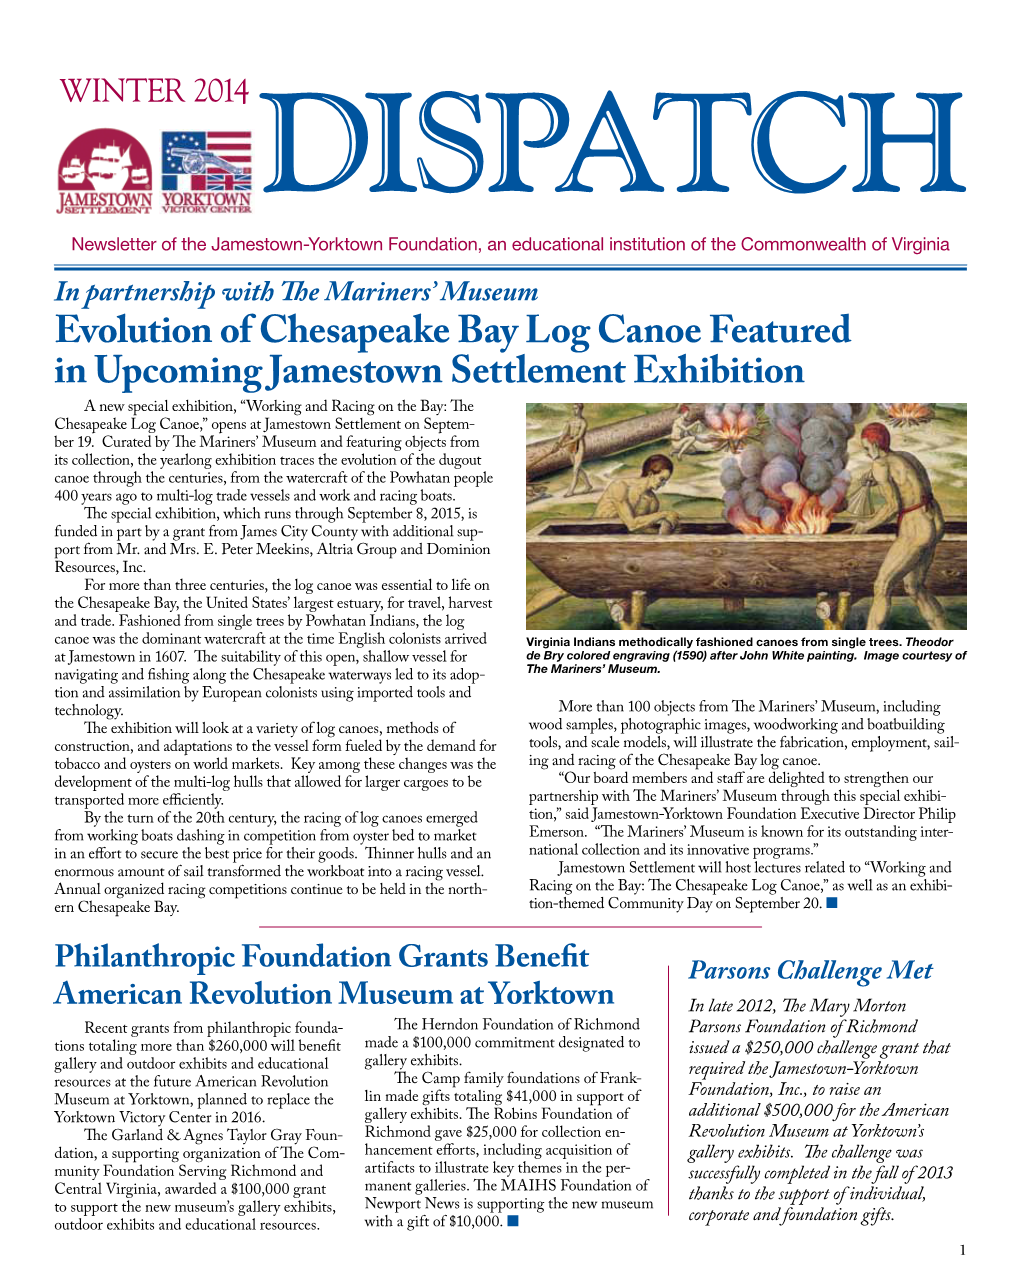 Winter 2014 DISPATCH Newsletter of the Jamestown-Yorktown Foundation, an Educational Institution of the Commonwealth of Virginia